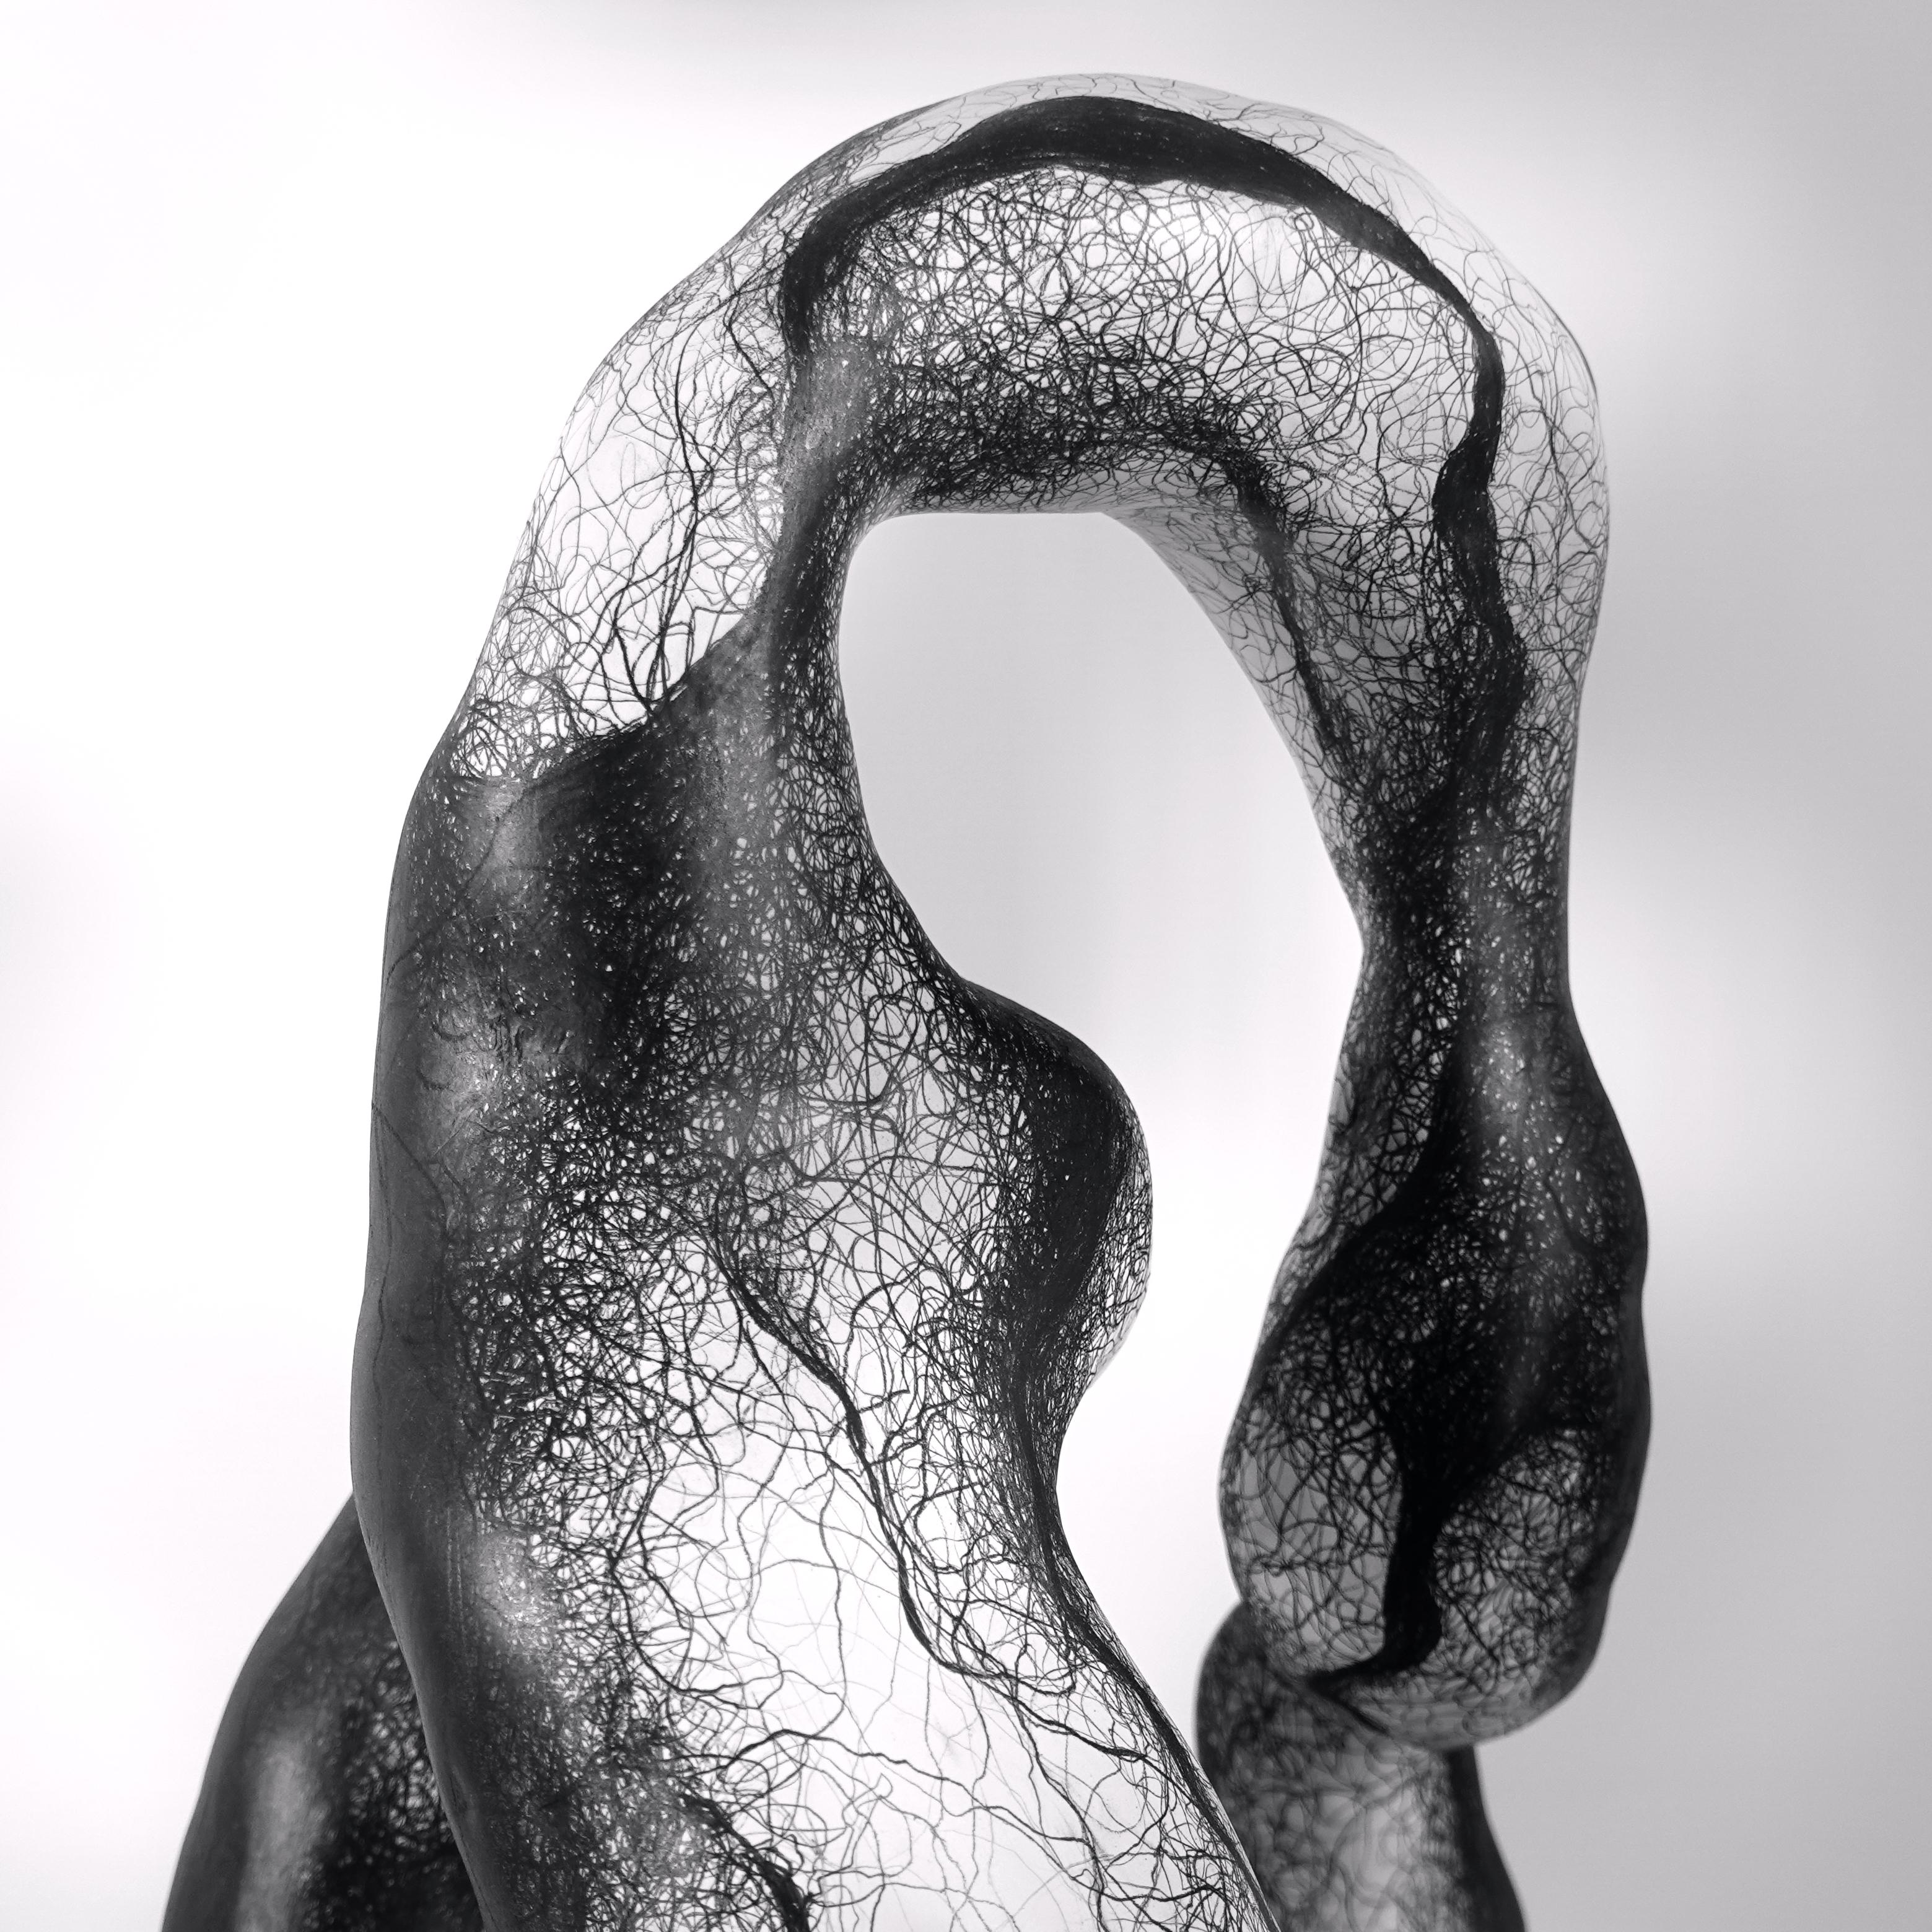 “My biomorphic abstractions range from intimate to immersive in scale, referencing our interconnectedness. 
 Building curvilinear ceramic sculpture and then drawing intertwined graphite lines on the surface, creates energy that seems to emanate from